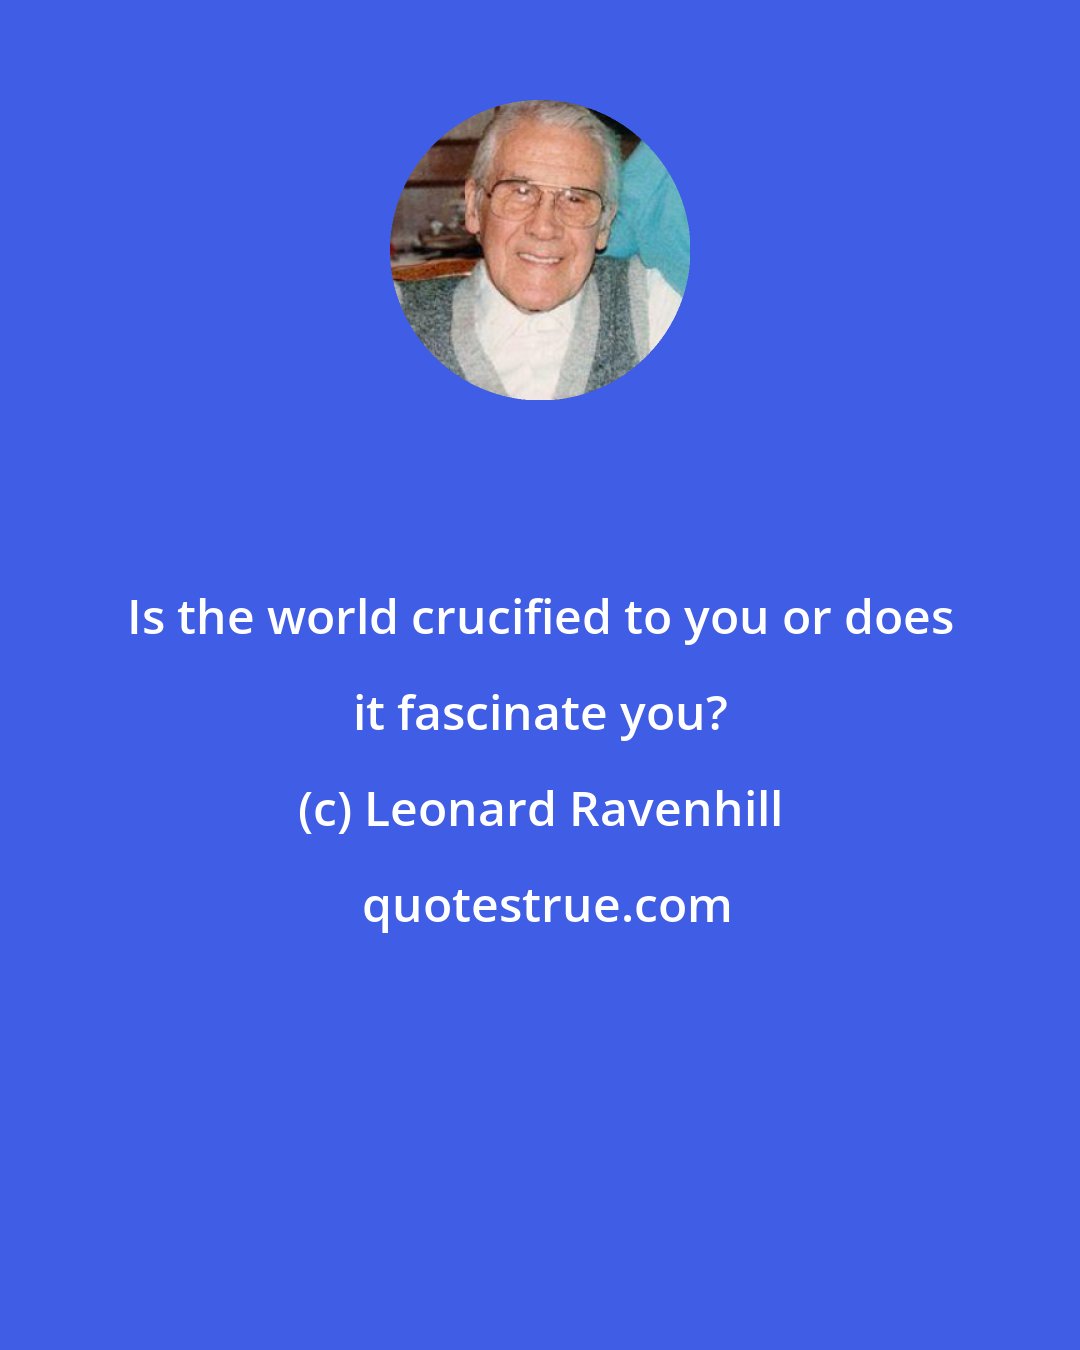 Leonard Ravenhill: Is the world crucified to you or does it fascinate you?